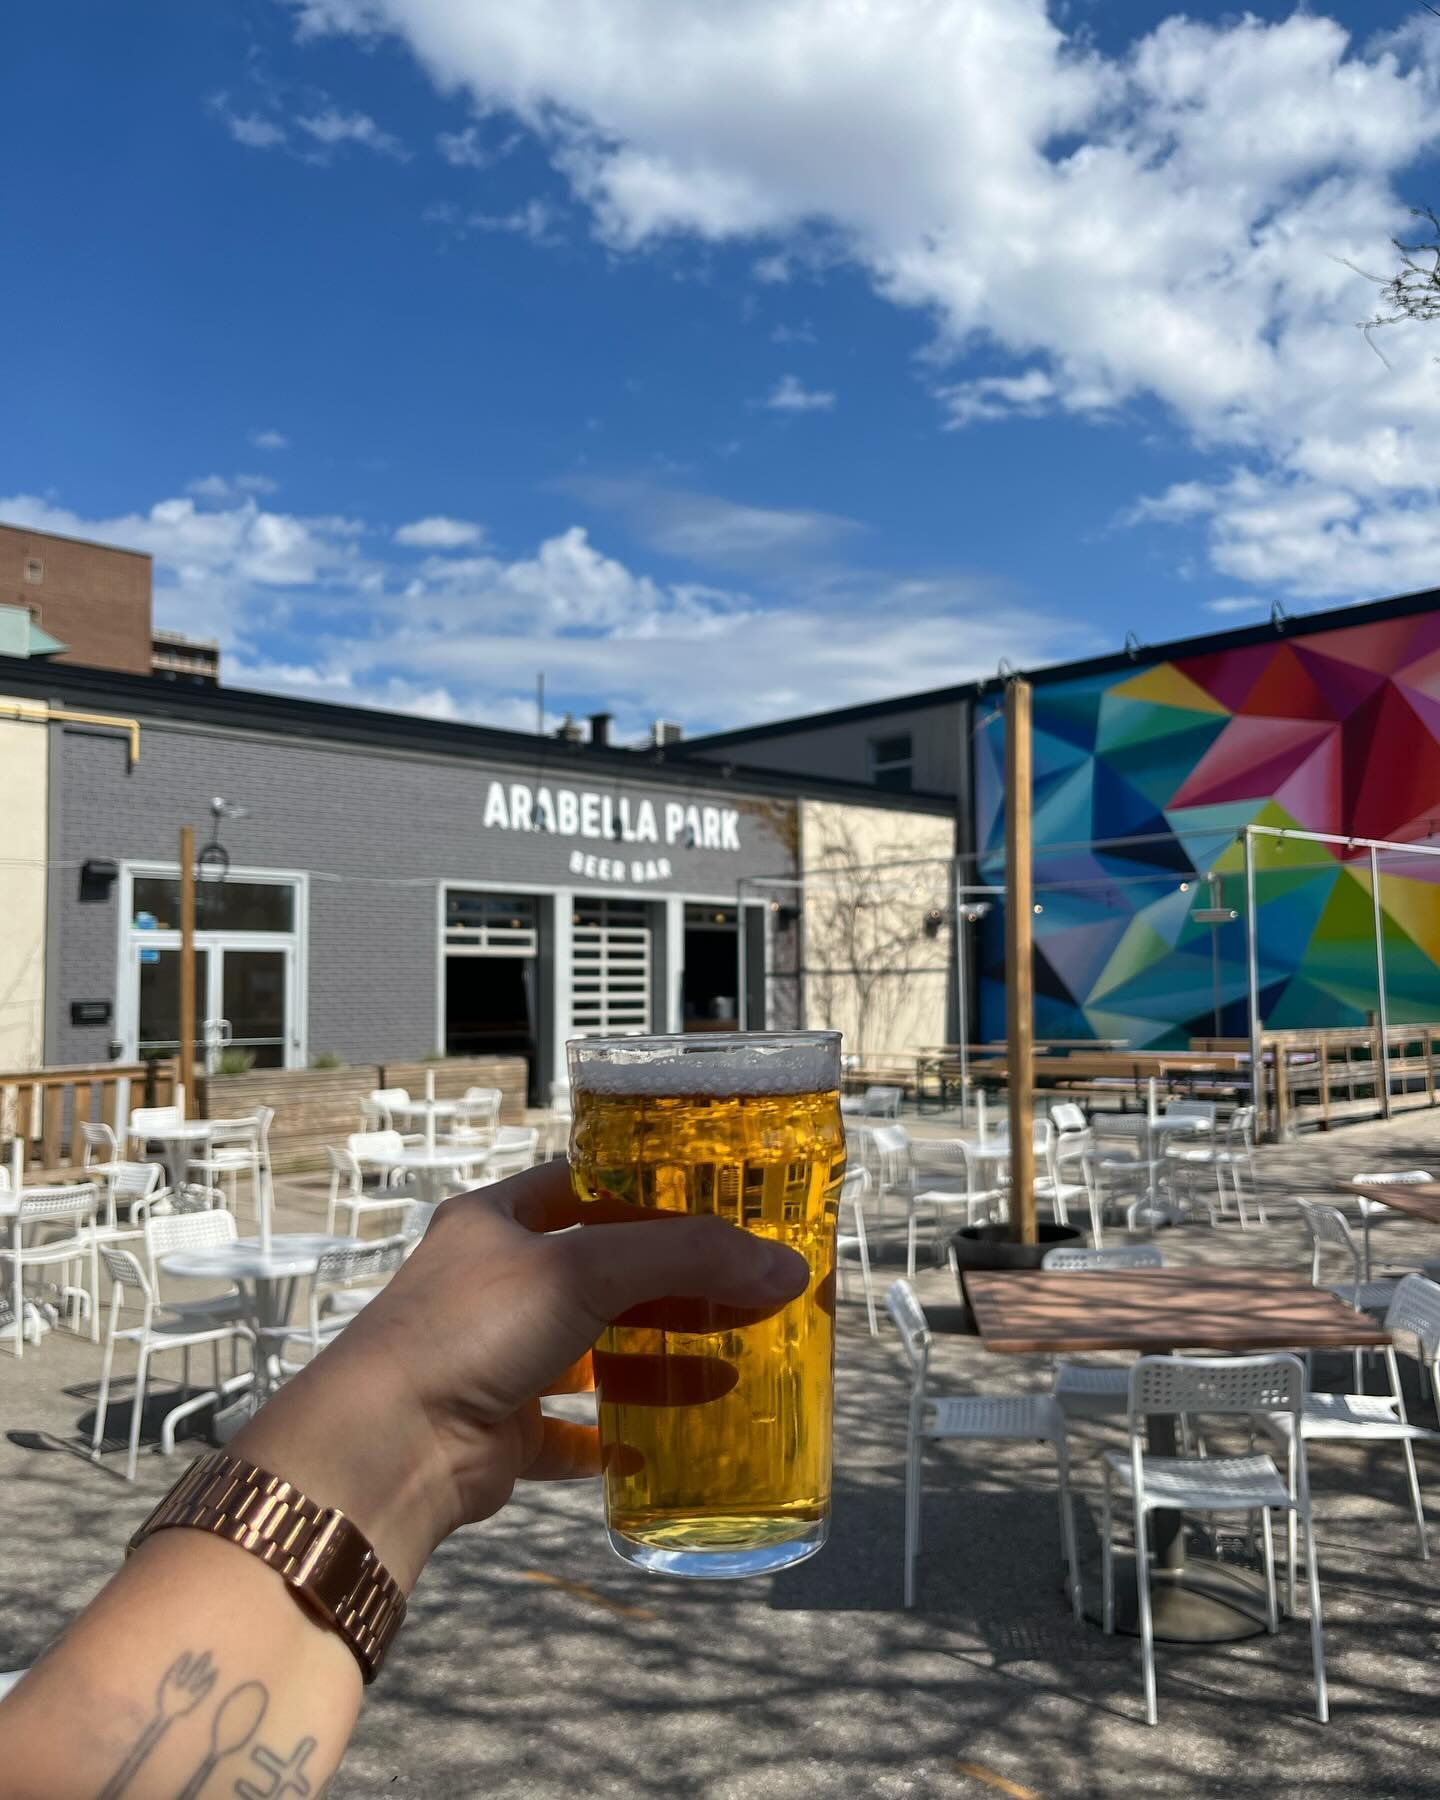 It's tiiiiiiiiiime ☀️🎉🍻

Patio szn is here at the park!! We've done our summer expansion and are ready to keep you beer &amp; burger-ed up 🍔🍟🍺😎

Come kick off the season with us! Here for ya til 10 tonight 💥